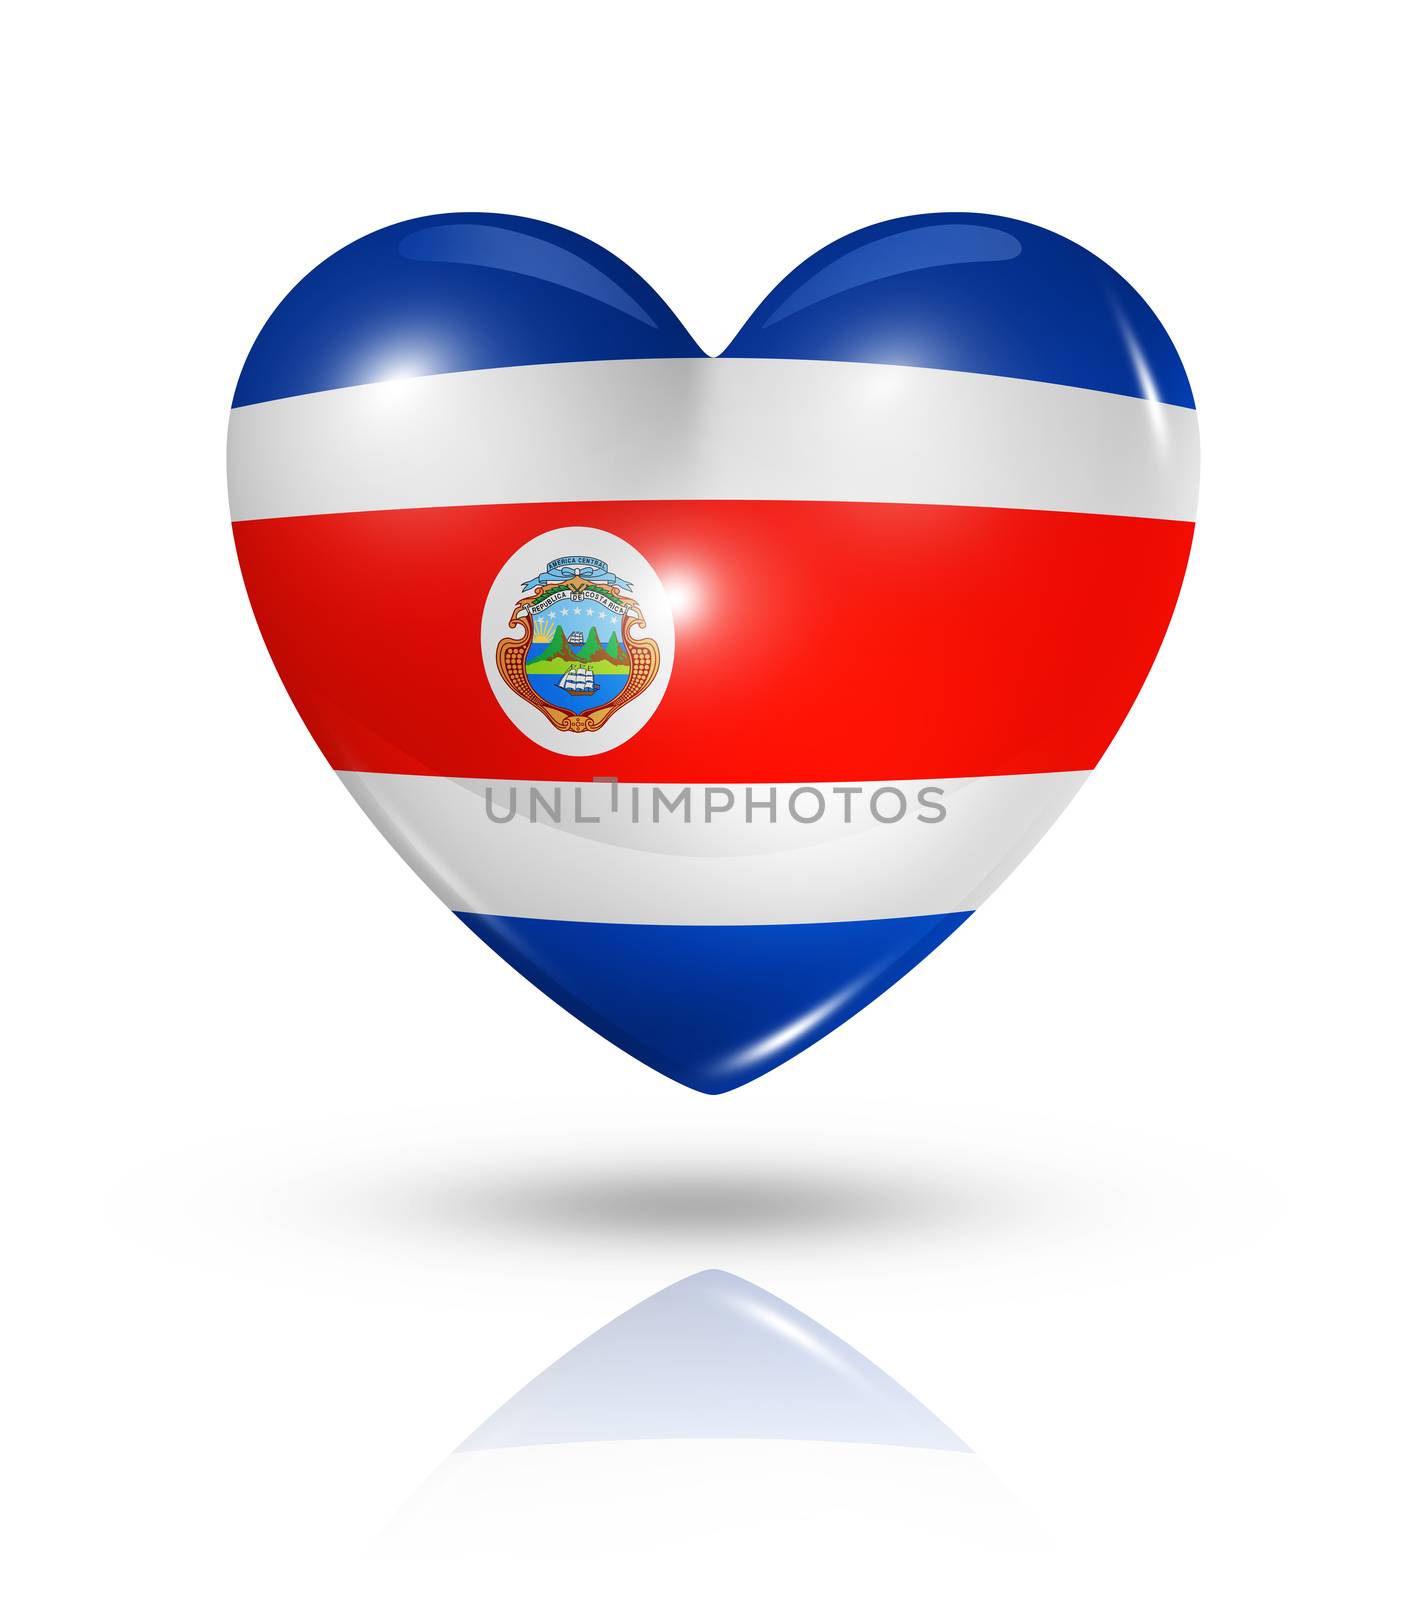 Love Costa Rica symbol. 3D heart flag icon isolated on white with clipping path